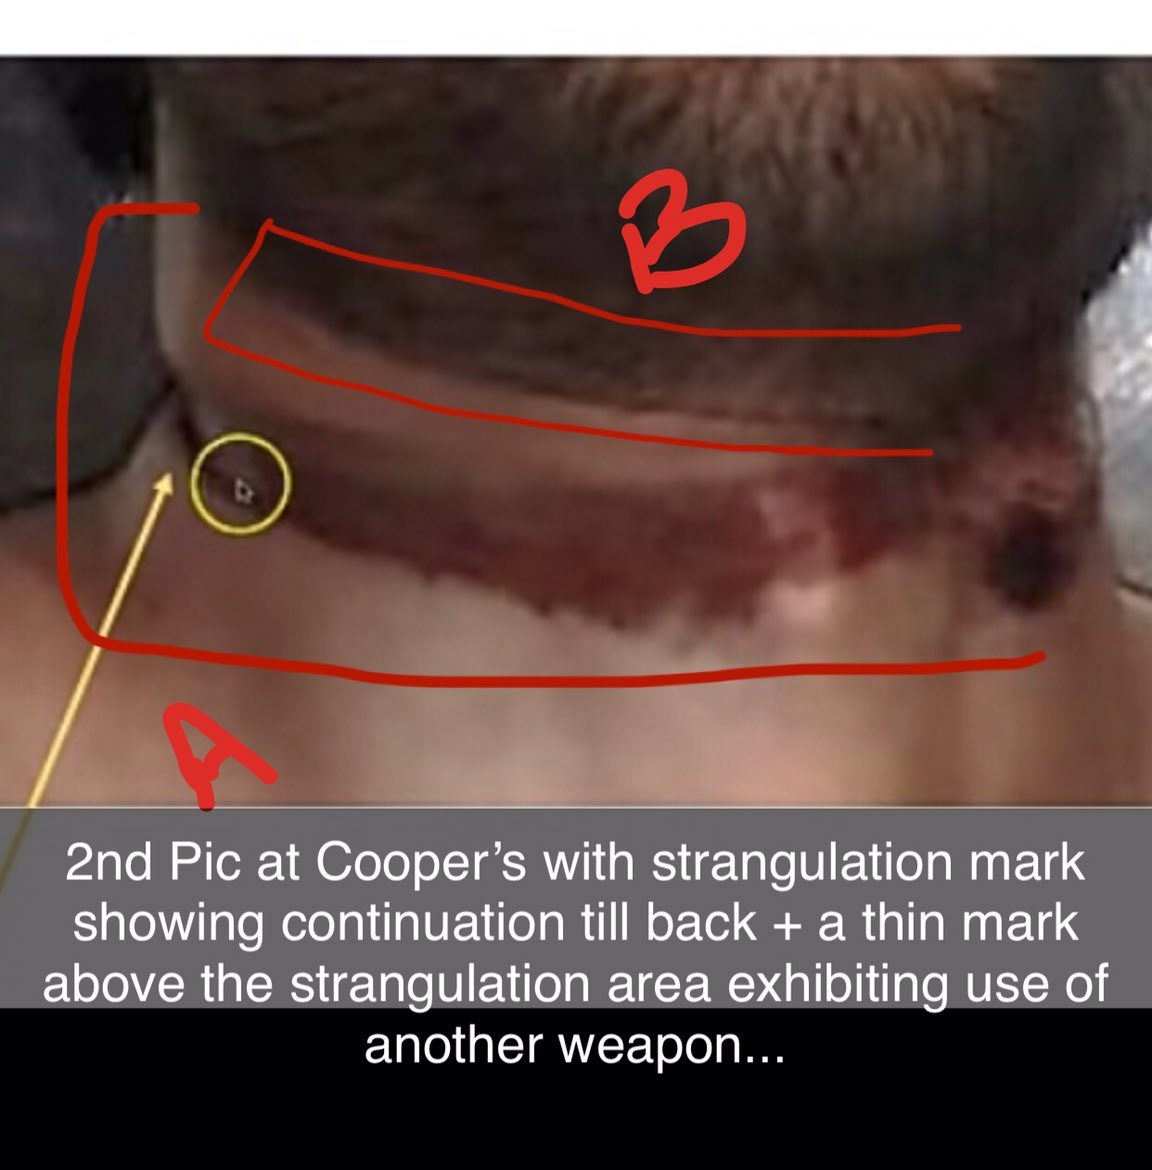 📌A deep 'O' shaped mark on Sushant's neck is an indicator of strangulation, not hanging! Is this mere fact not sufficient for investigation under 302❓ @CBIHeadquarters @arjunrammeghwal @IPS_Association @PMOIndia CBI SSR Ko Insaaf Do #JusticeForSushantSinghRajput